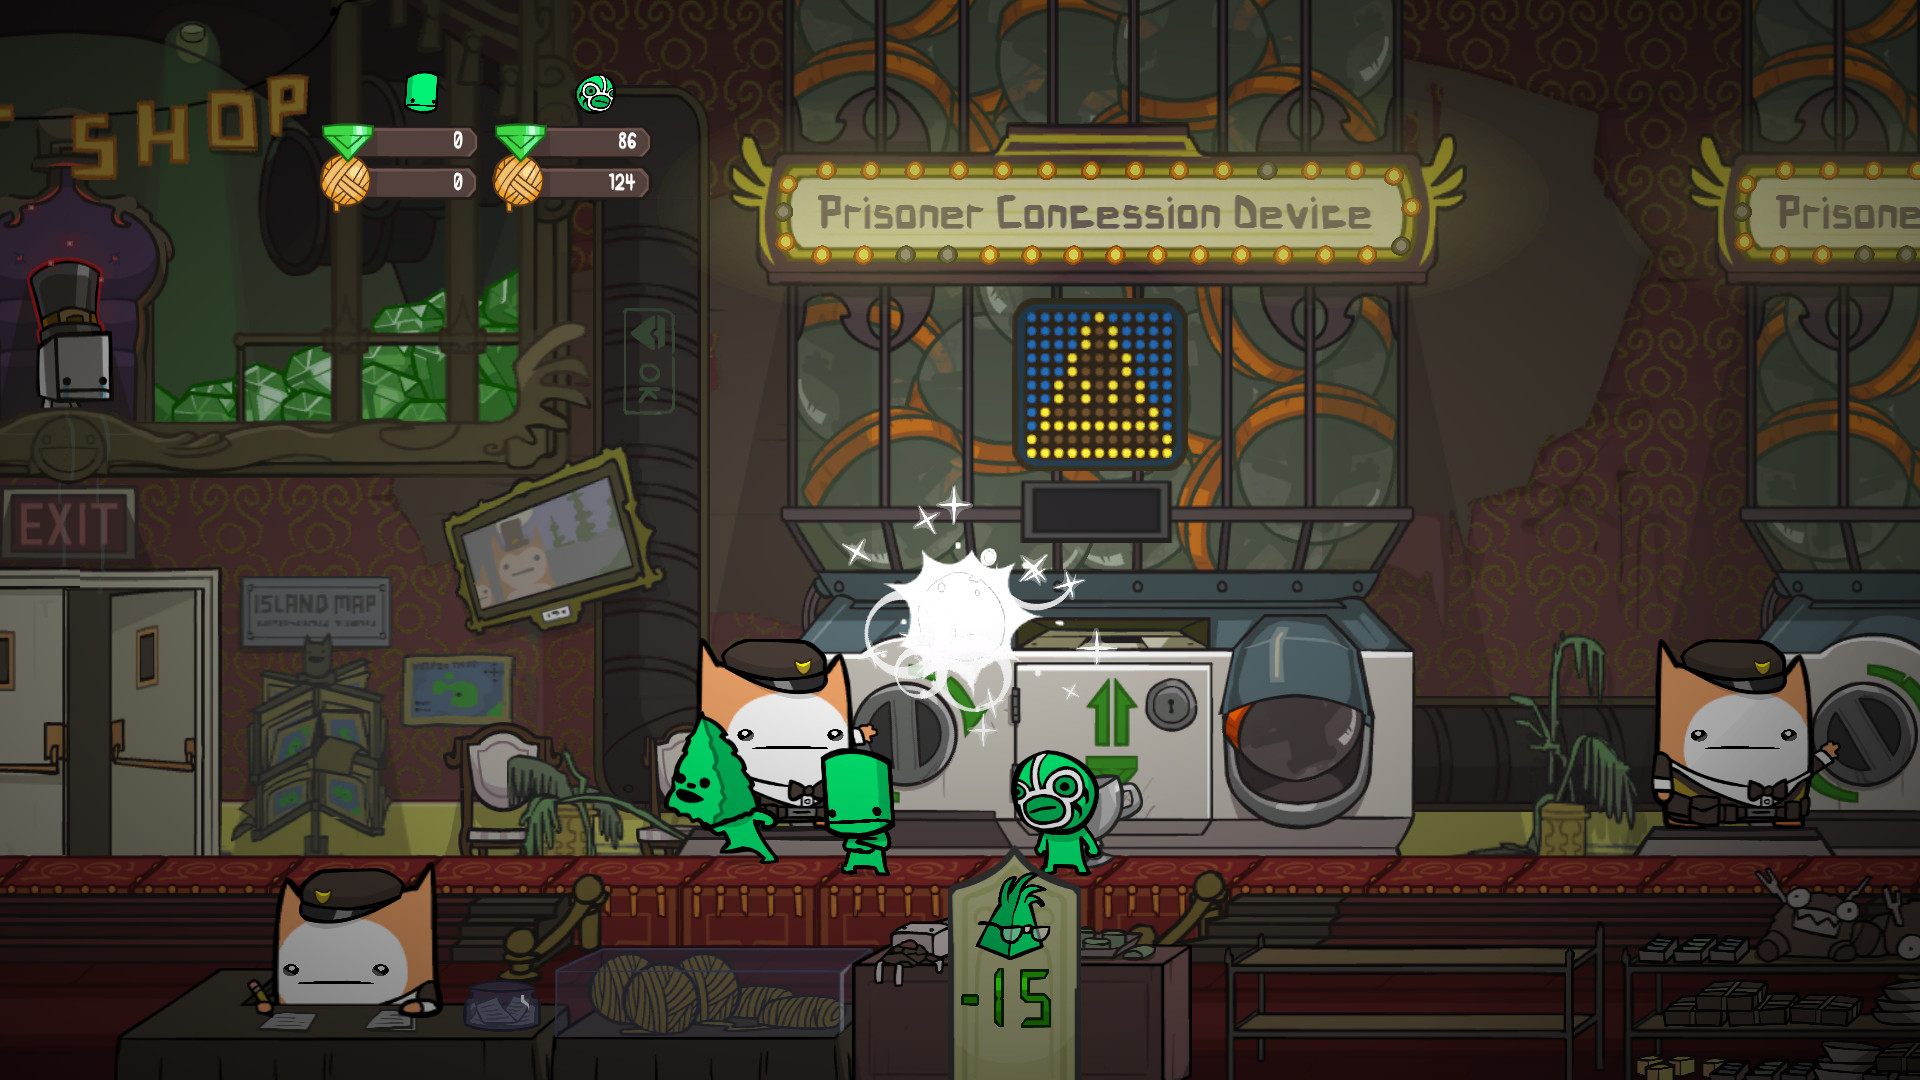 BattleBlock Theater Windows Spending gems to free the prisoners. There are 300 of them